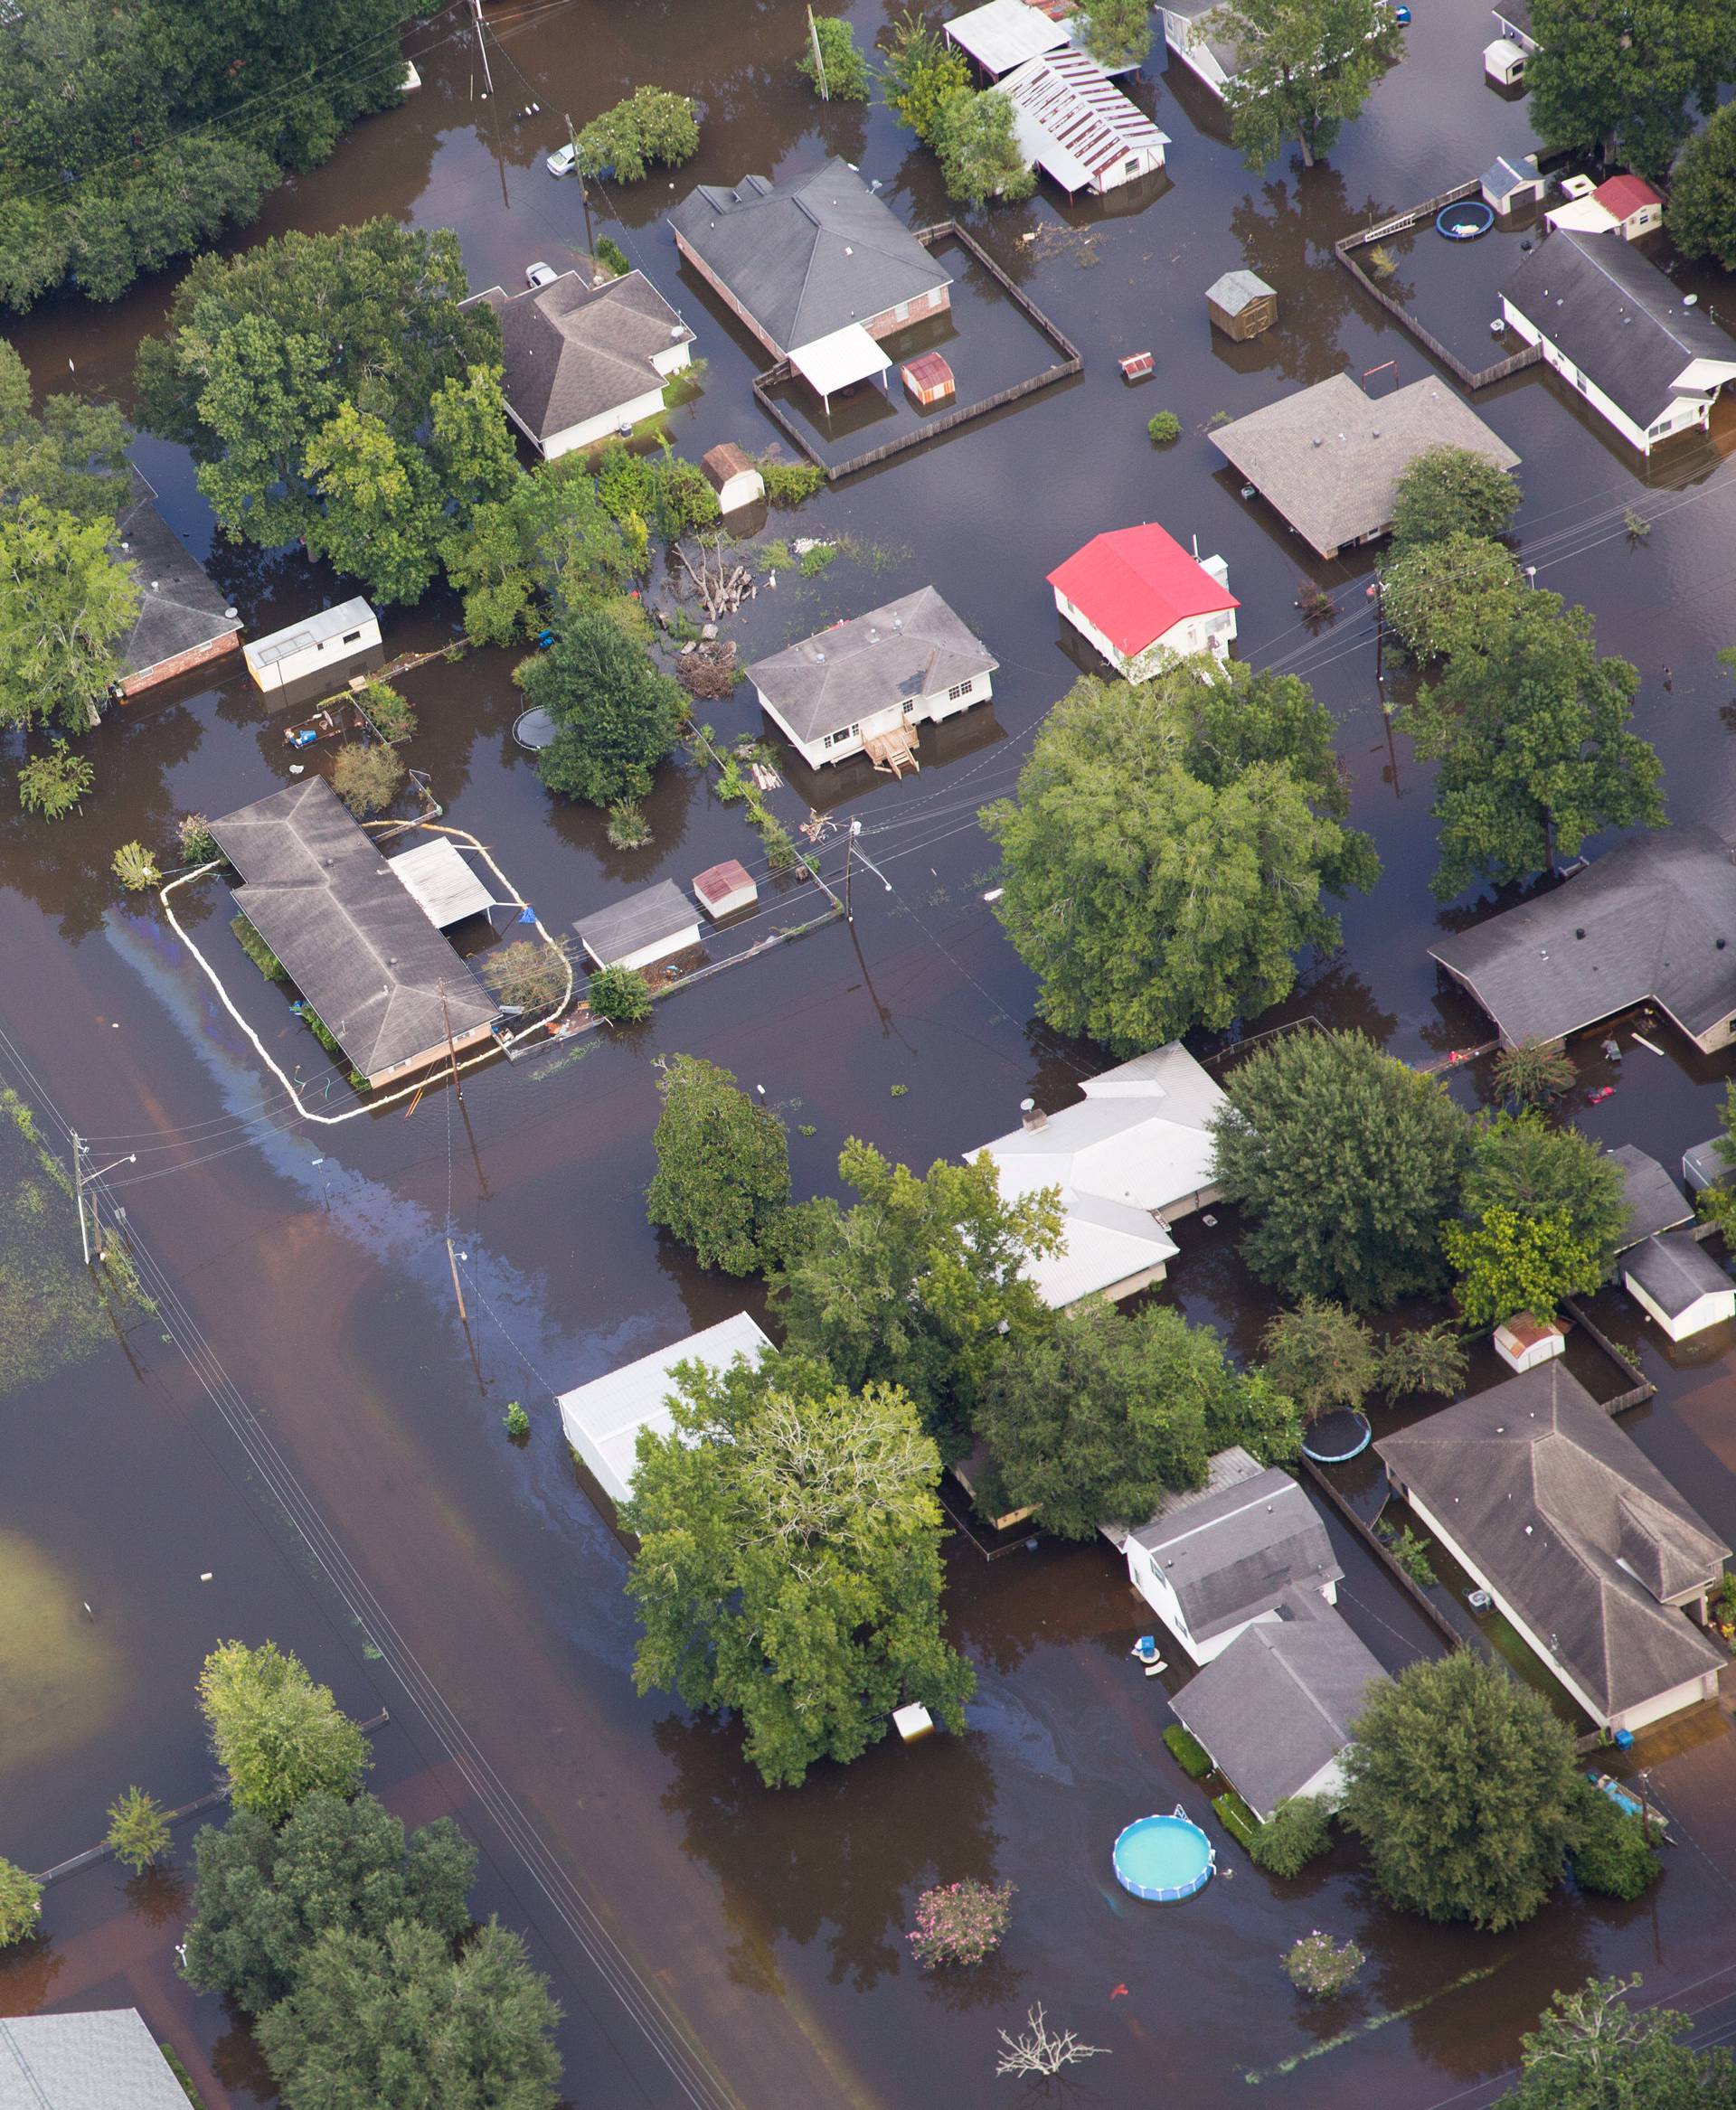 Contaminated floodwaters impact a neighborhood as seen in an aerial view in Sorrento, Louisiana